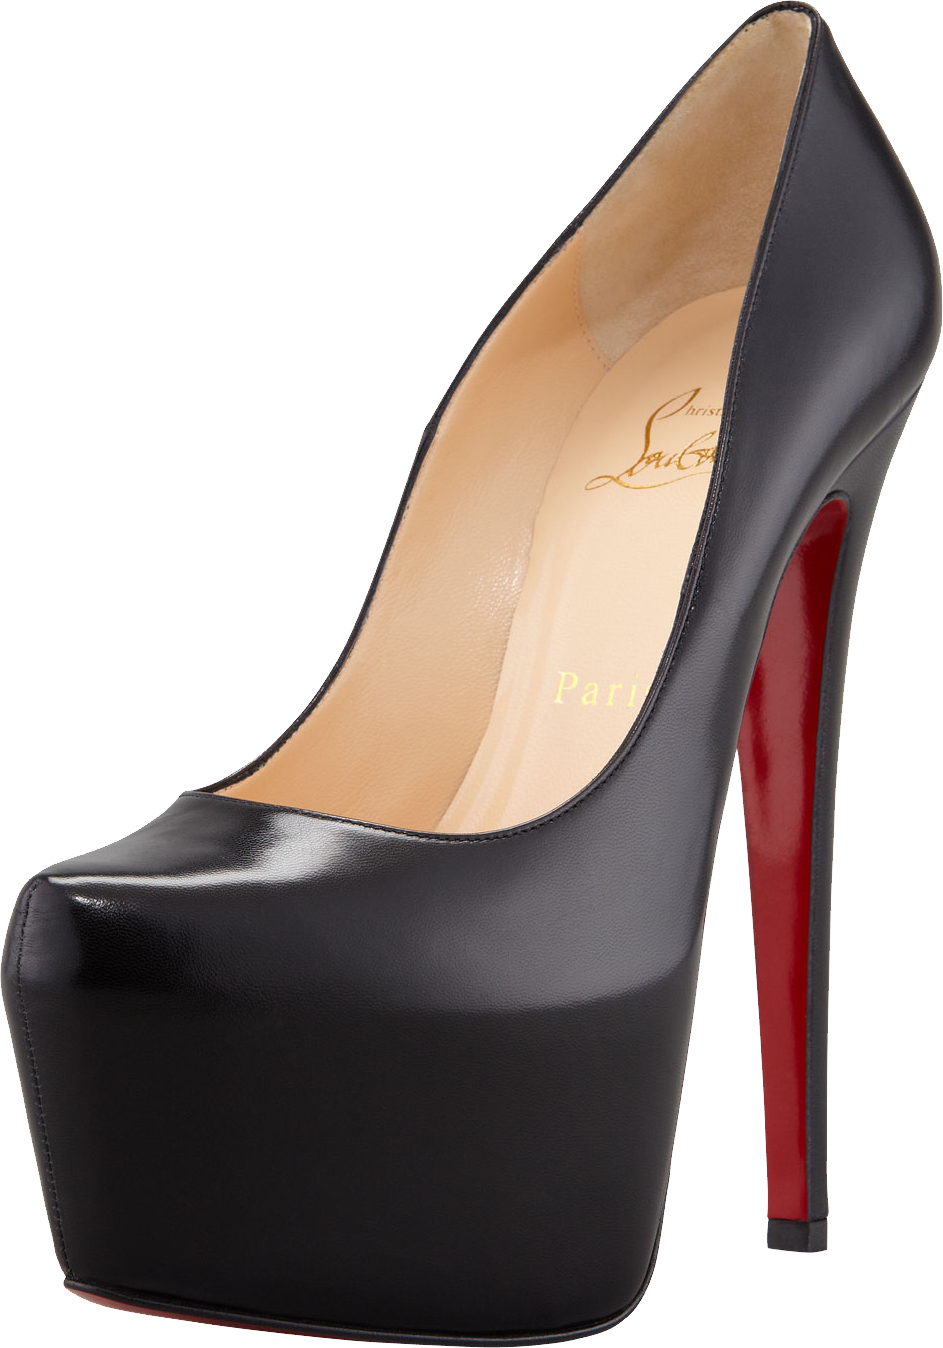 Louboutin Women's High Quality PNG Image